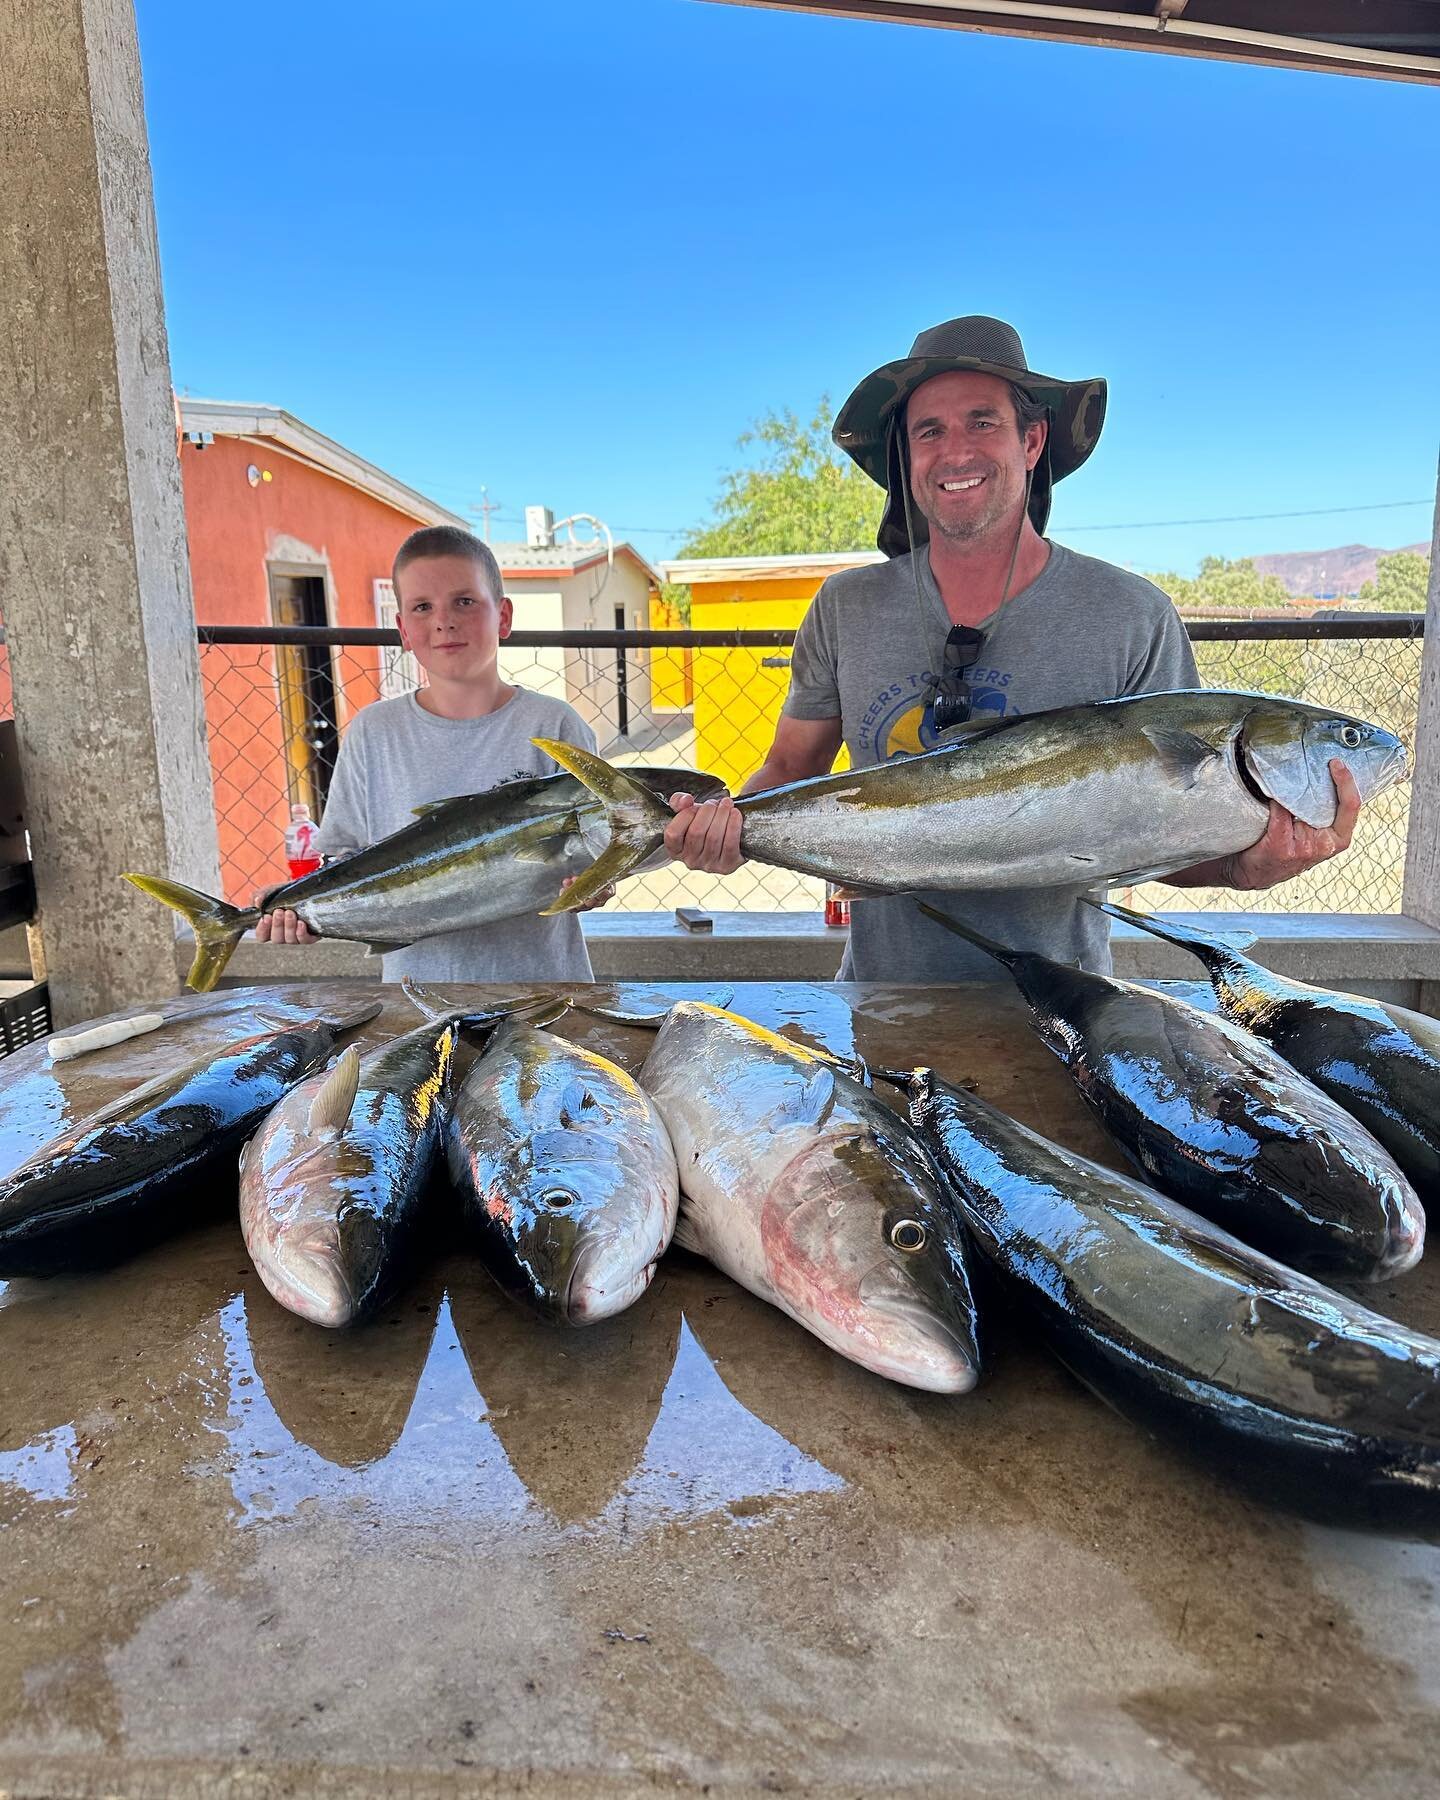 Viva La Mexico! 🇲🇽 A Father-Son Fishing Expedition!  Amidst the turquoise waters of the Sea of Cortez, Rob and son find that Mexico is a fishing paradise, 🎣🌊